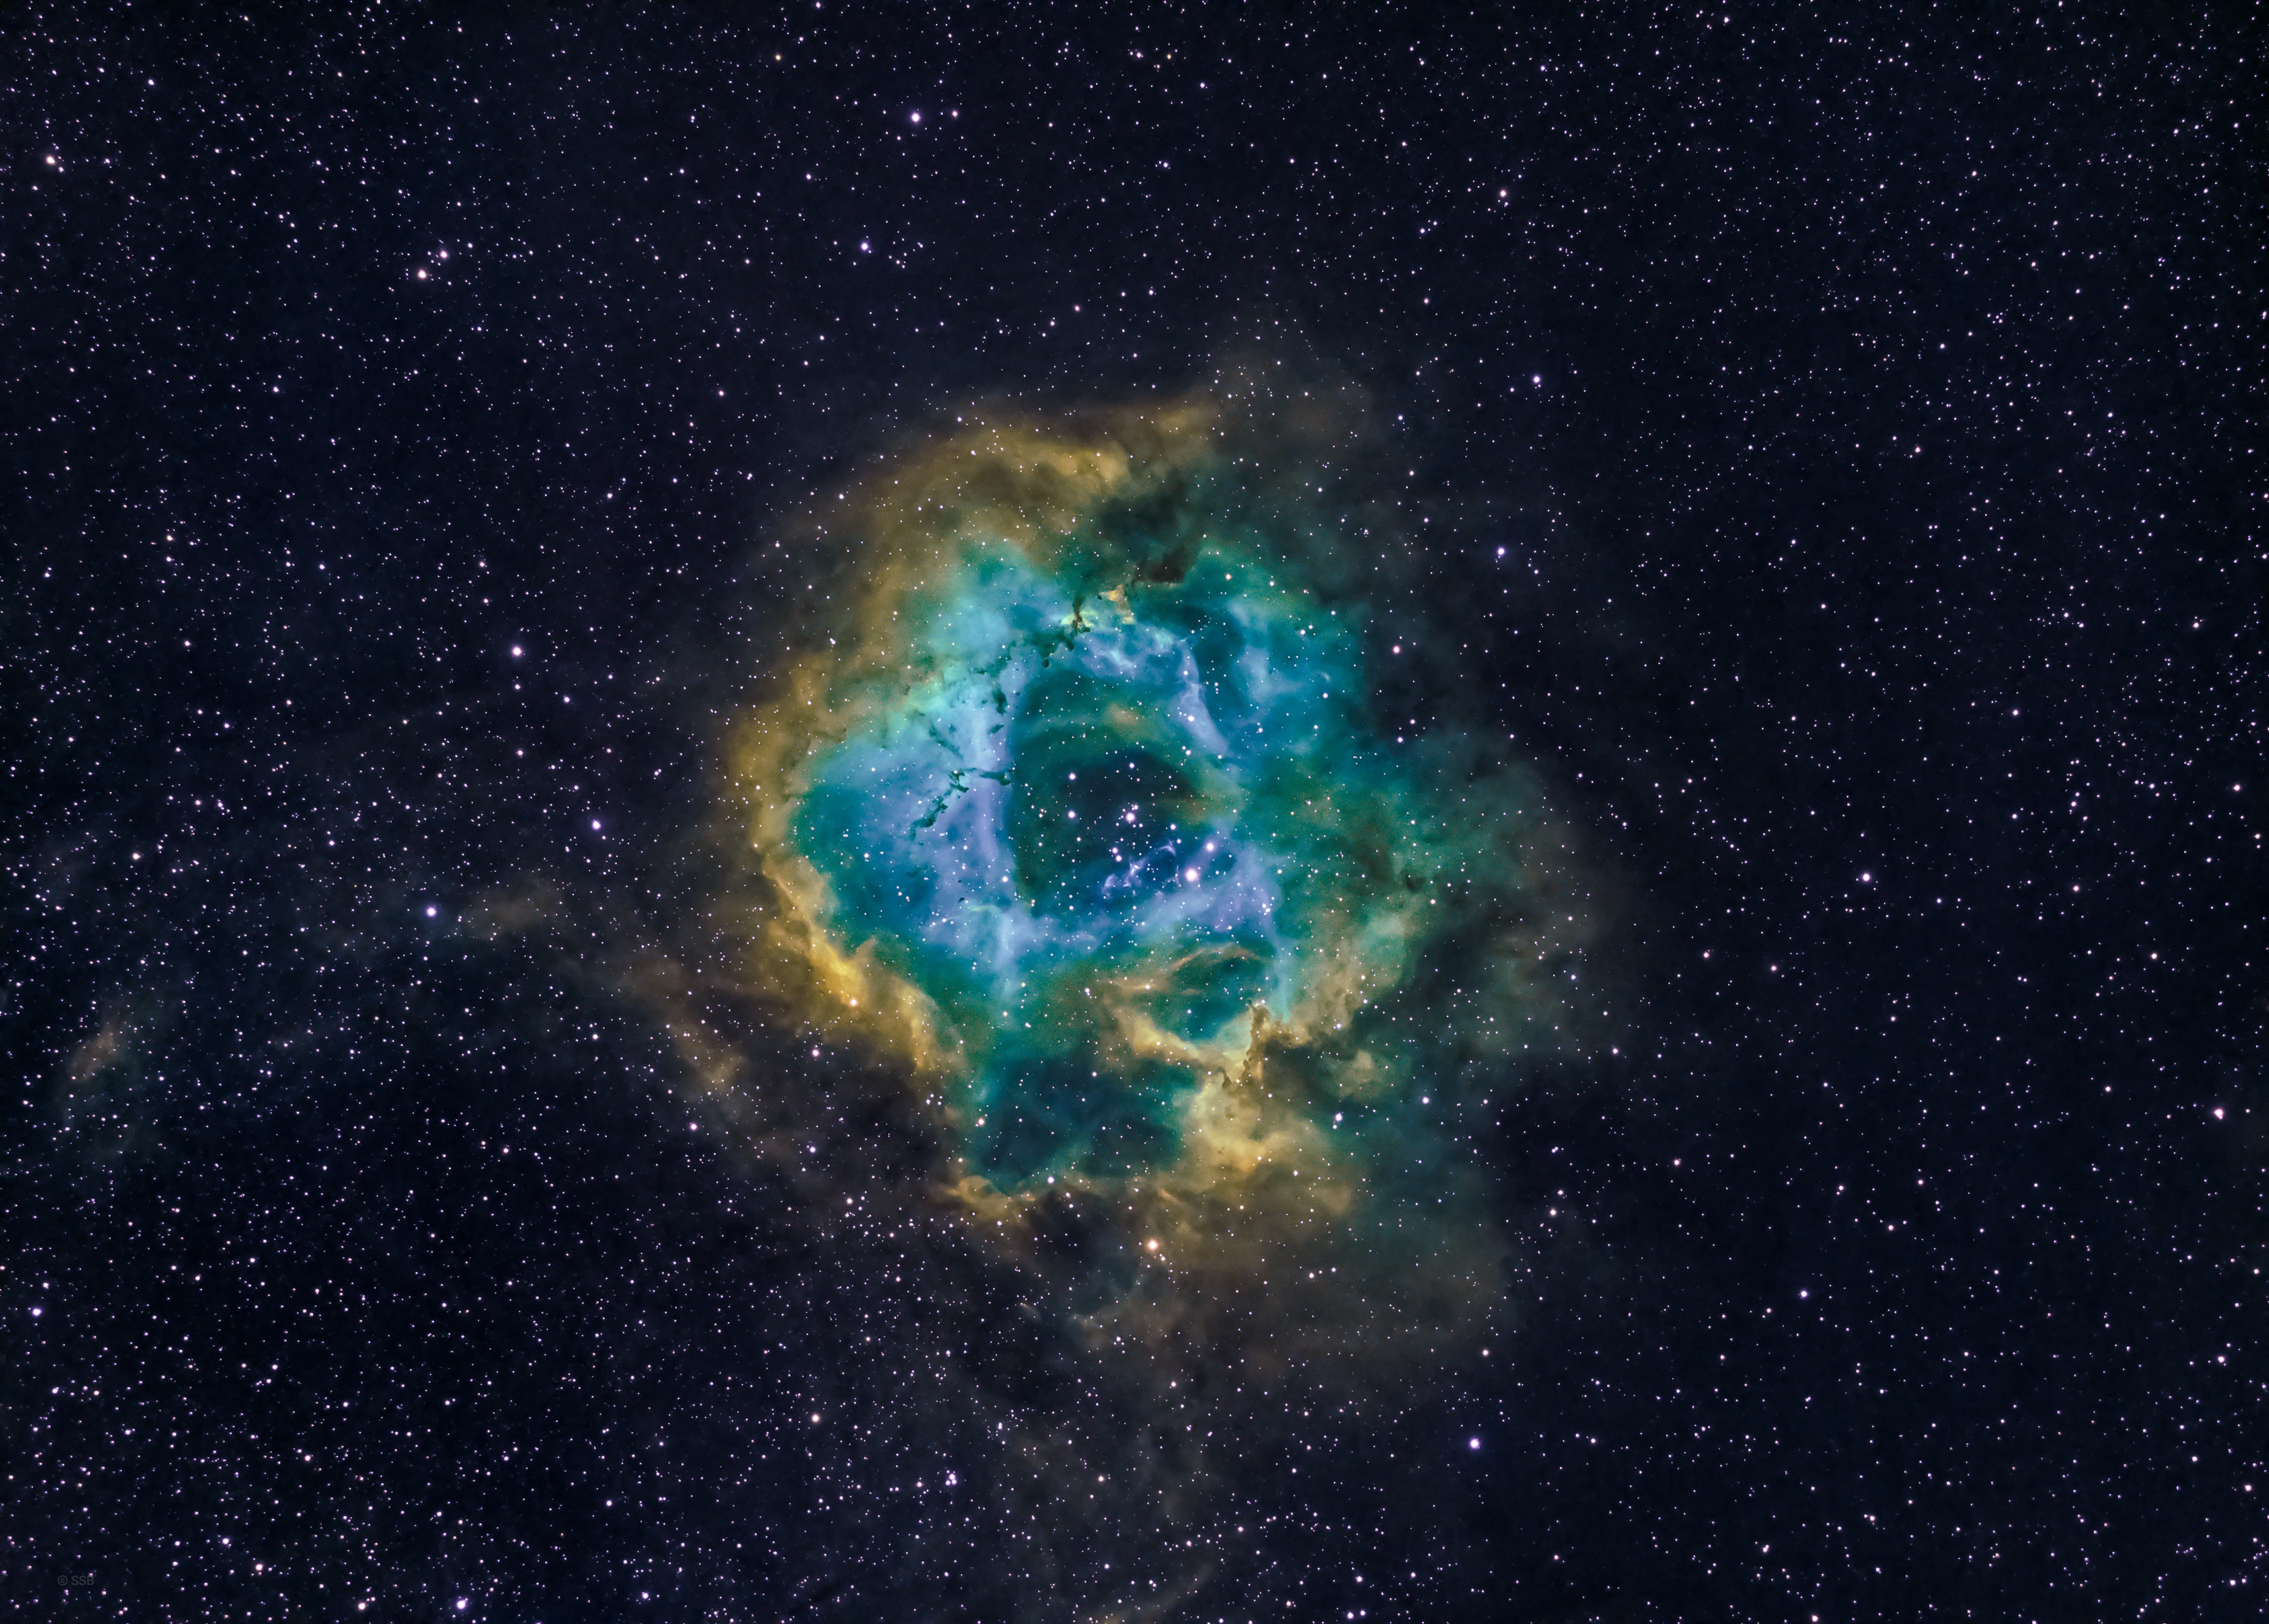 HD wallpaper, Milky Way, Hubble Palette, Stars, Rosette Nebula, Outer Space, Blue Galaxy, Astronomy